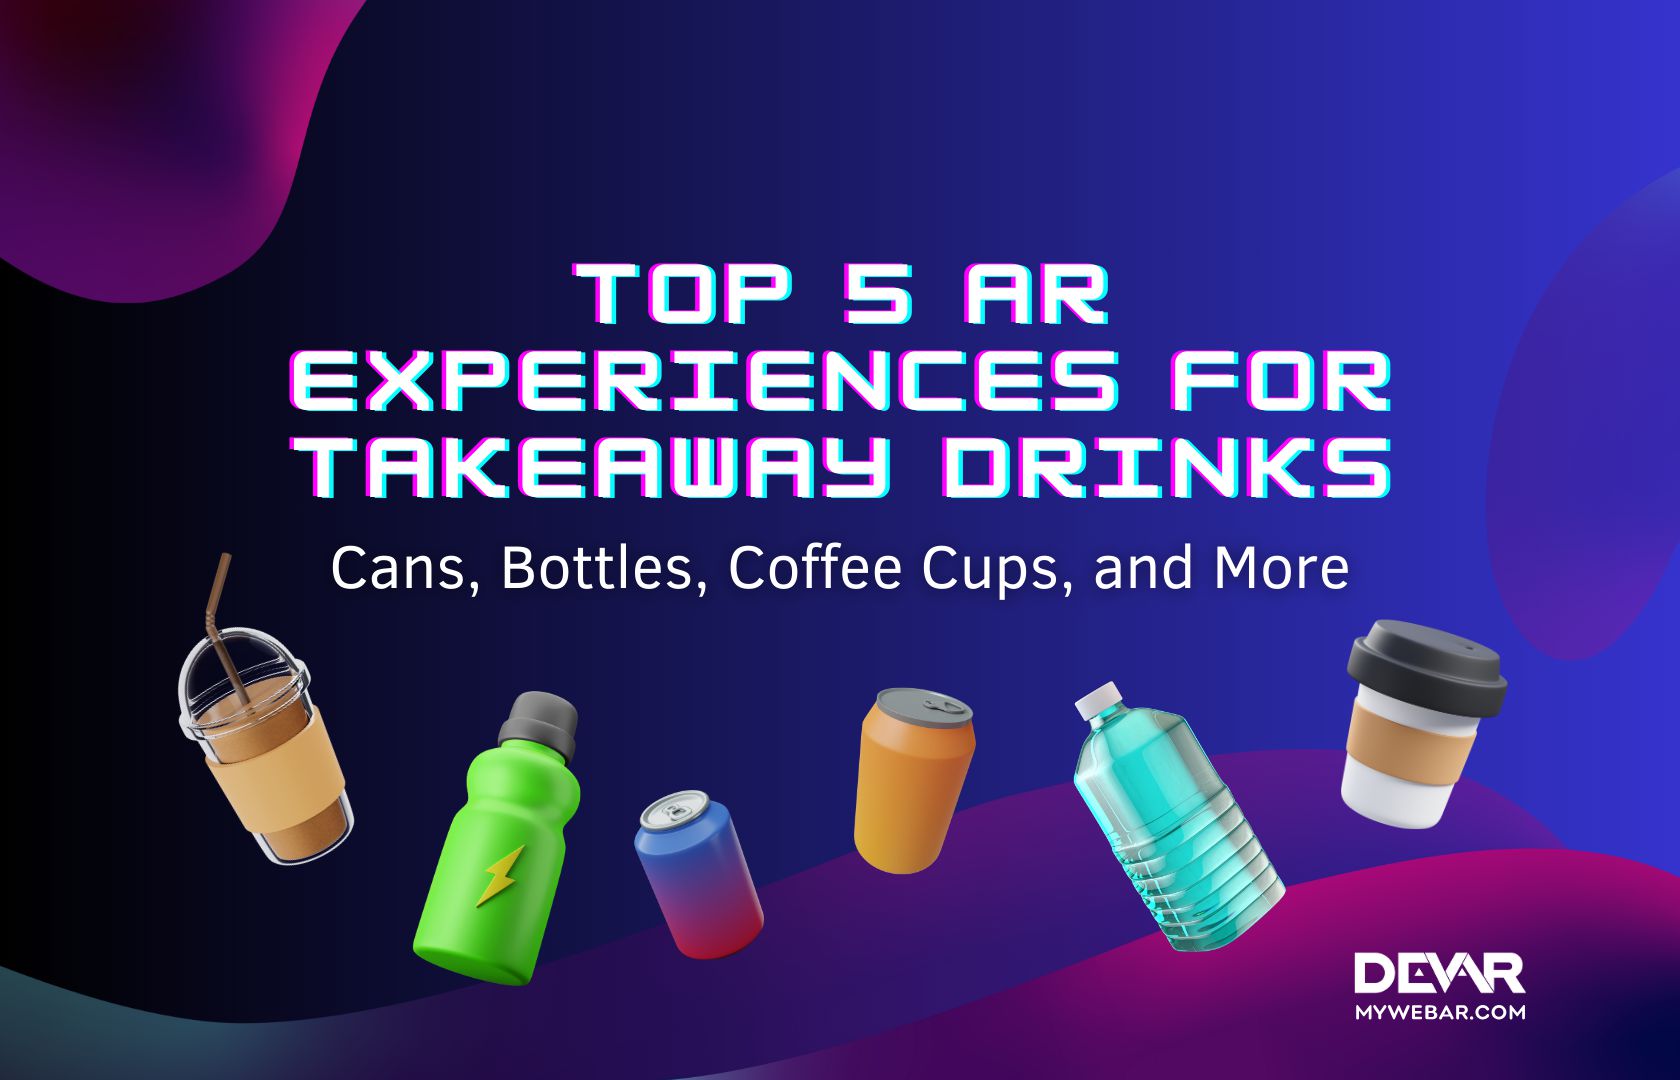 Top 5 AR Experiences for Takeaway Drinks: Cans, Bottles, Coffee Cups, and More